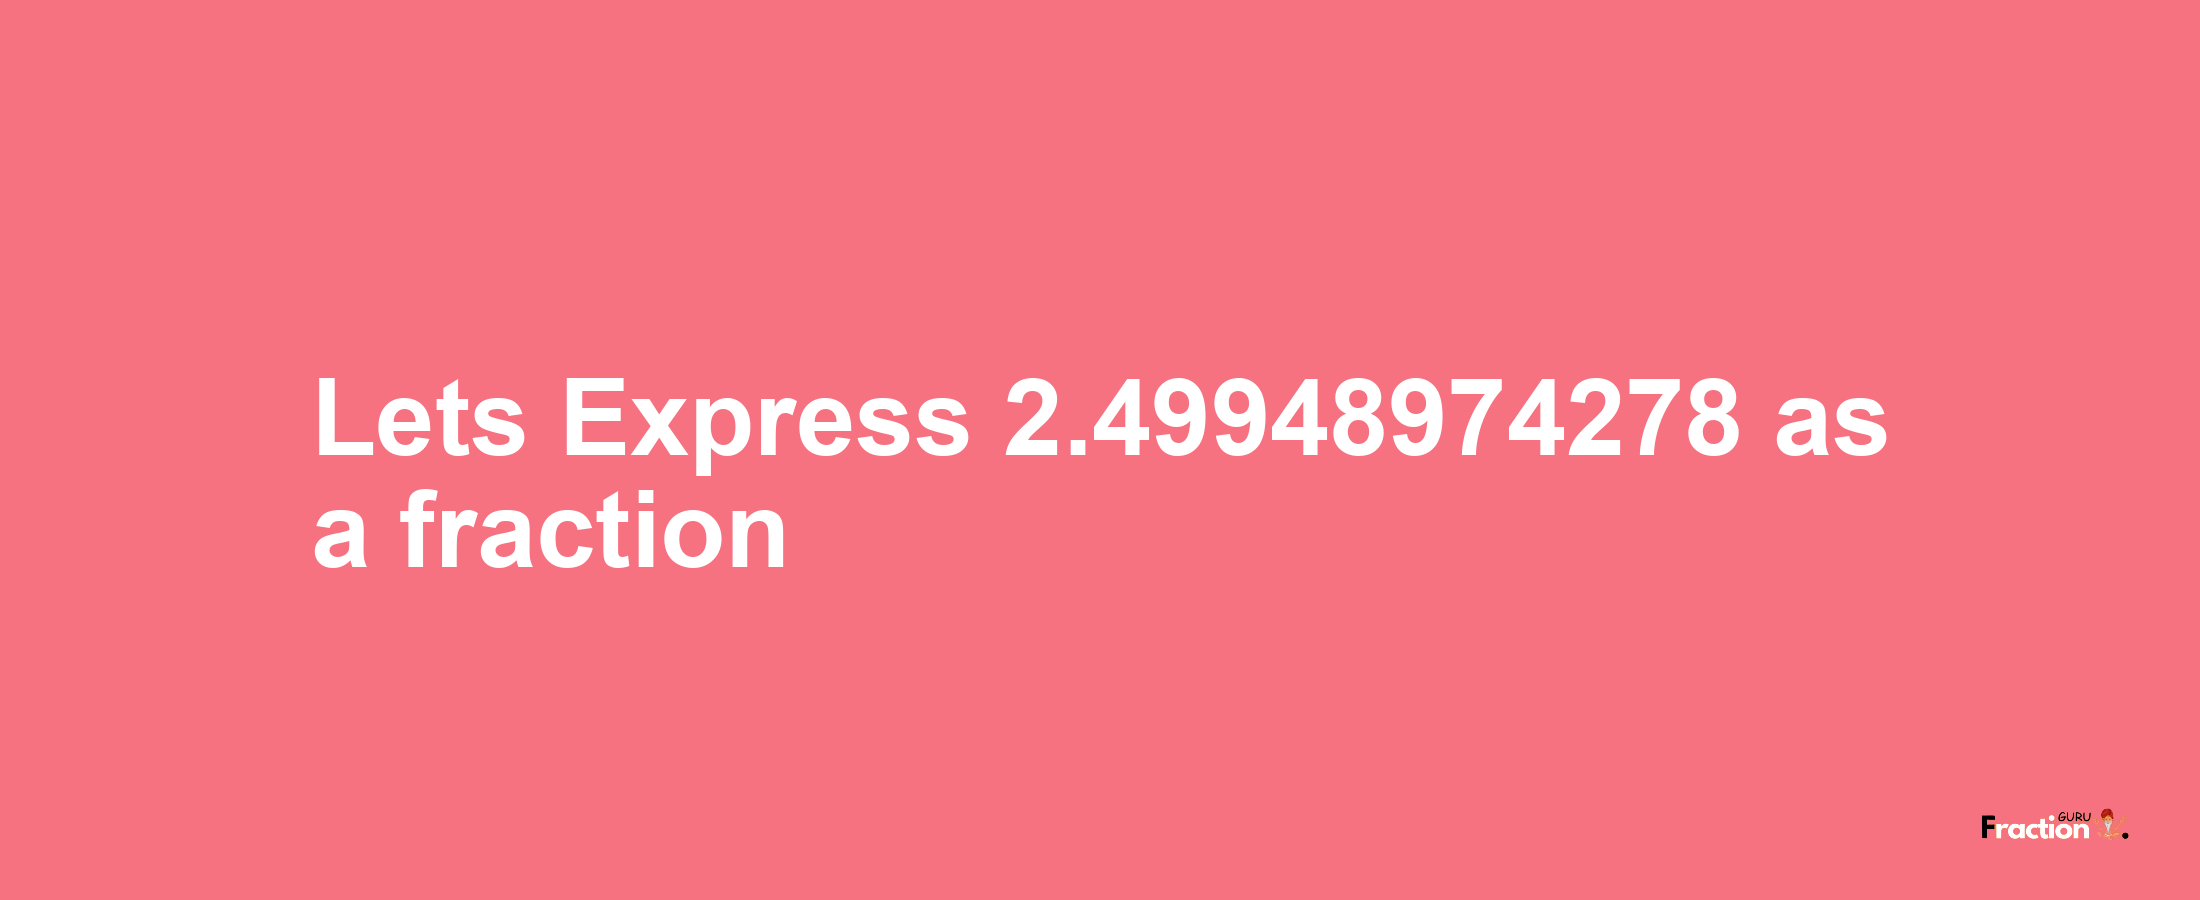 Lets Express 2.49948974278 as afraction